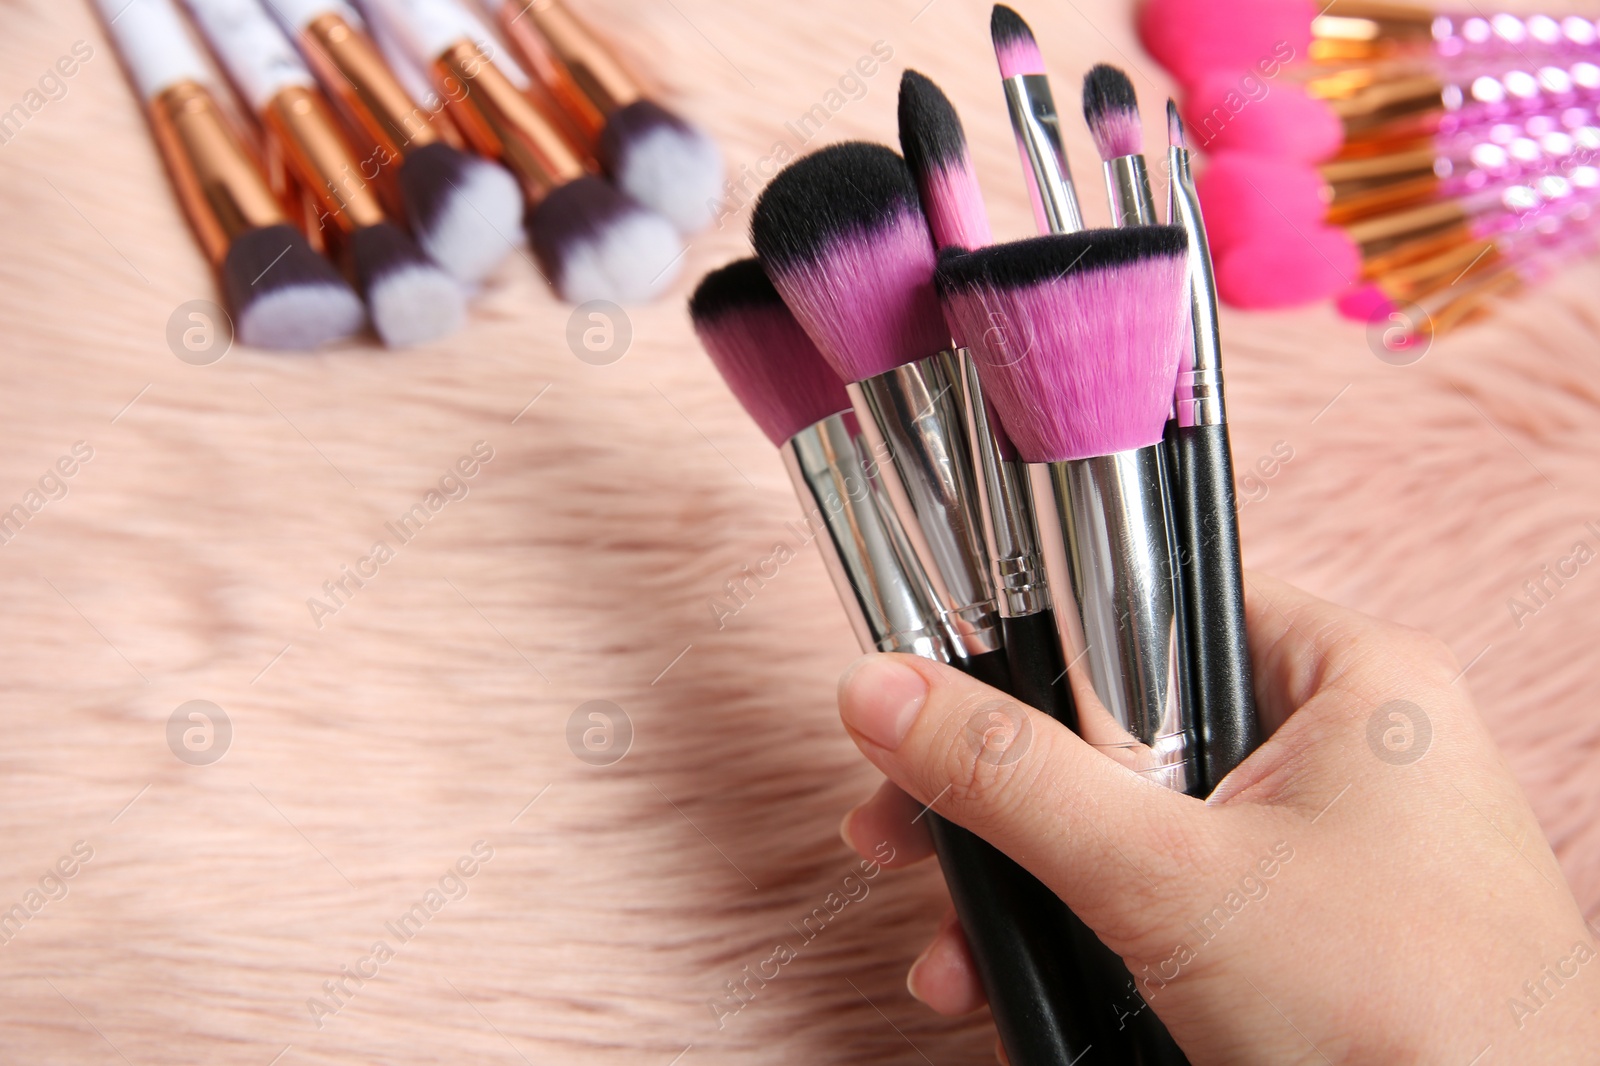 Photo of Woman holding makeup brushes over furry fabric, closeup view. Space for text